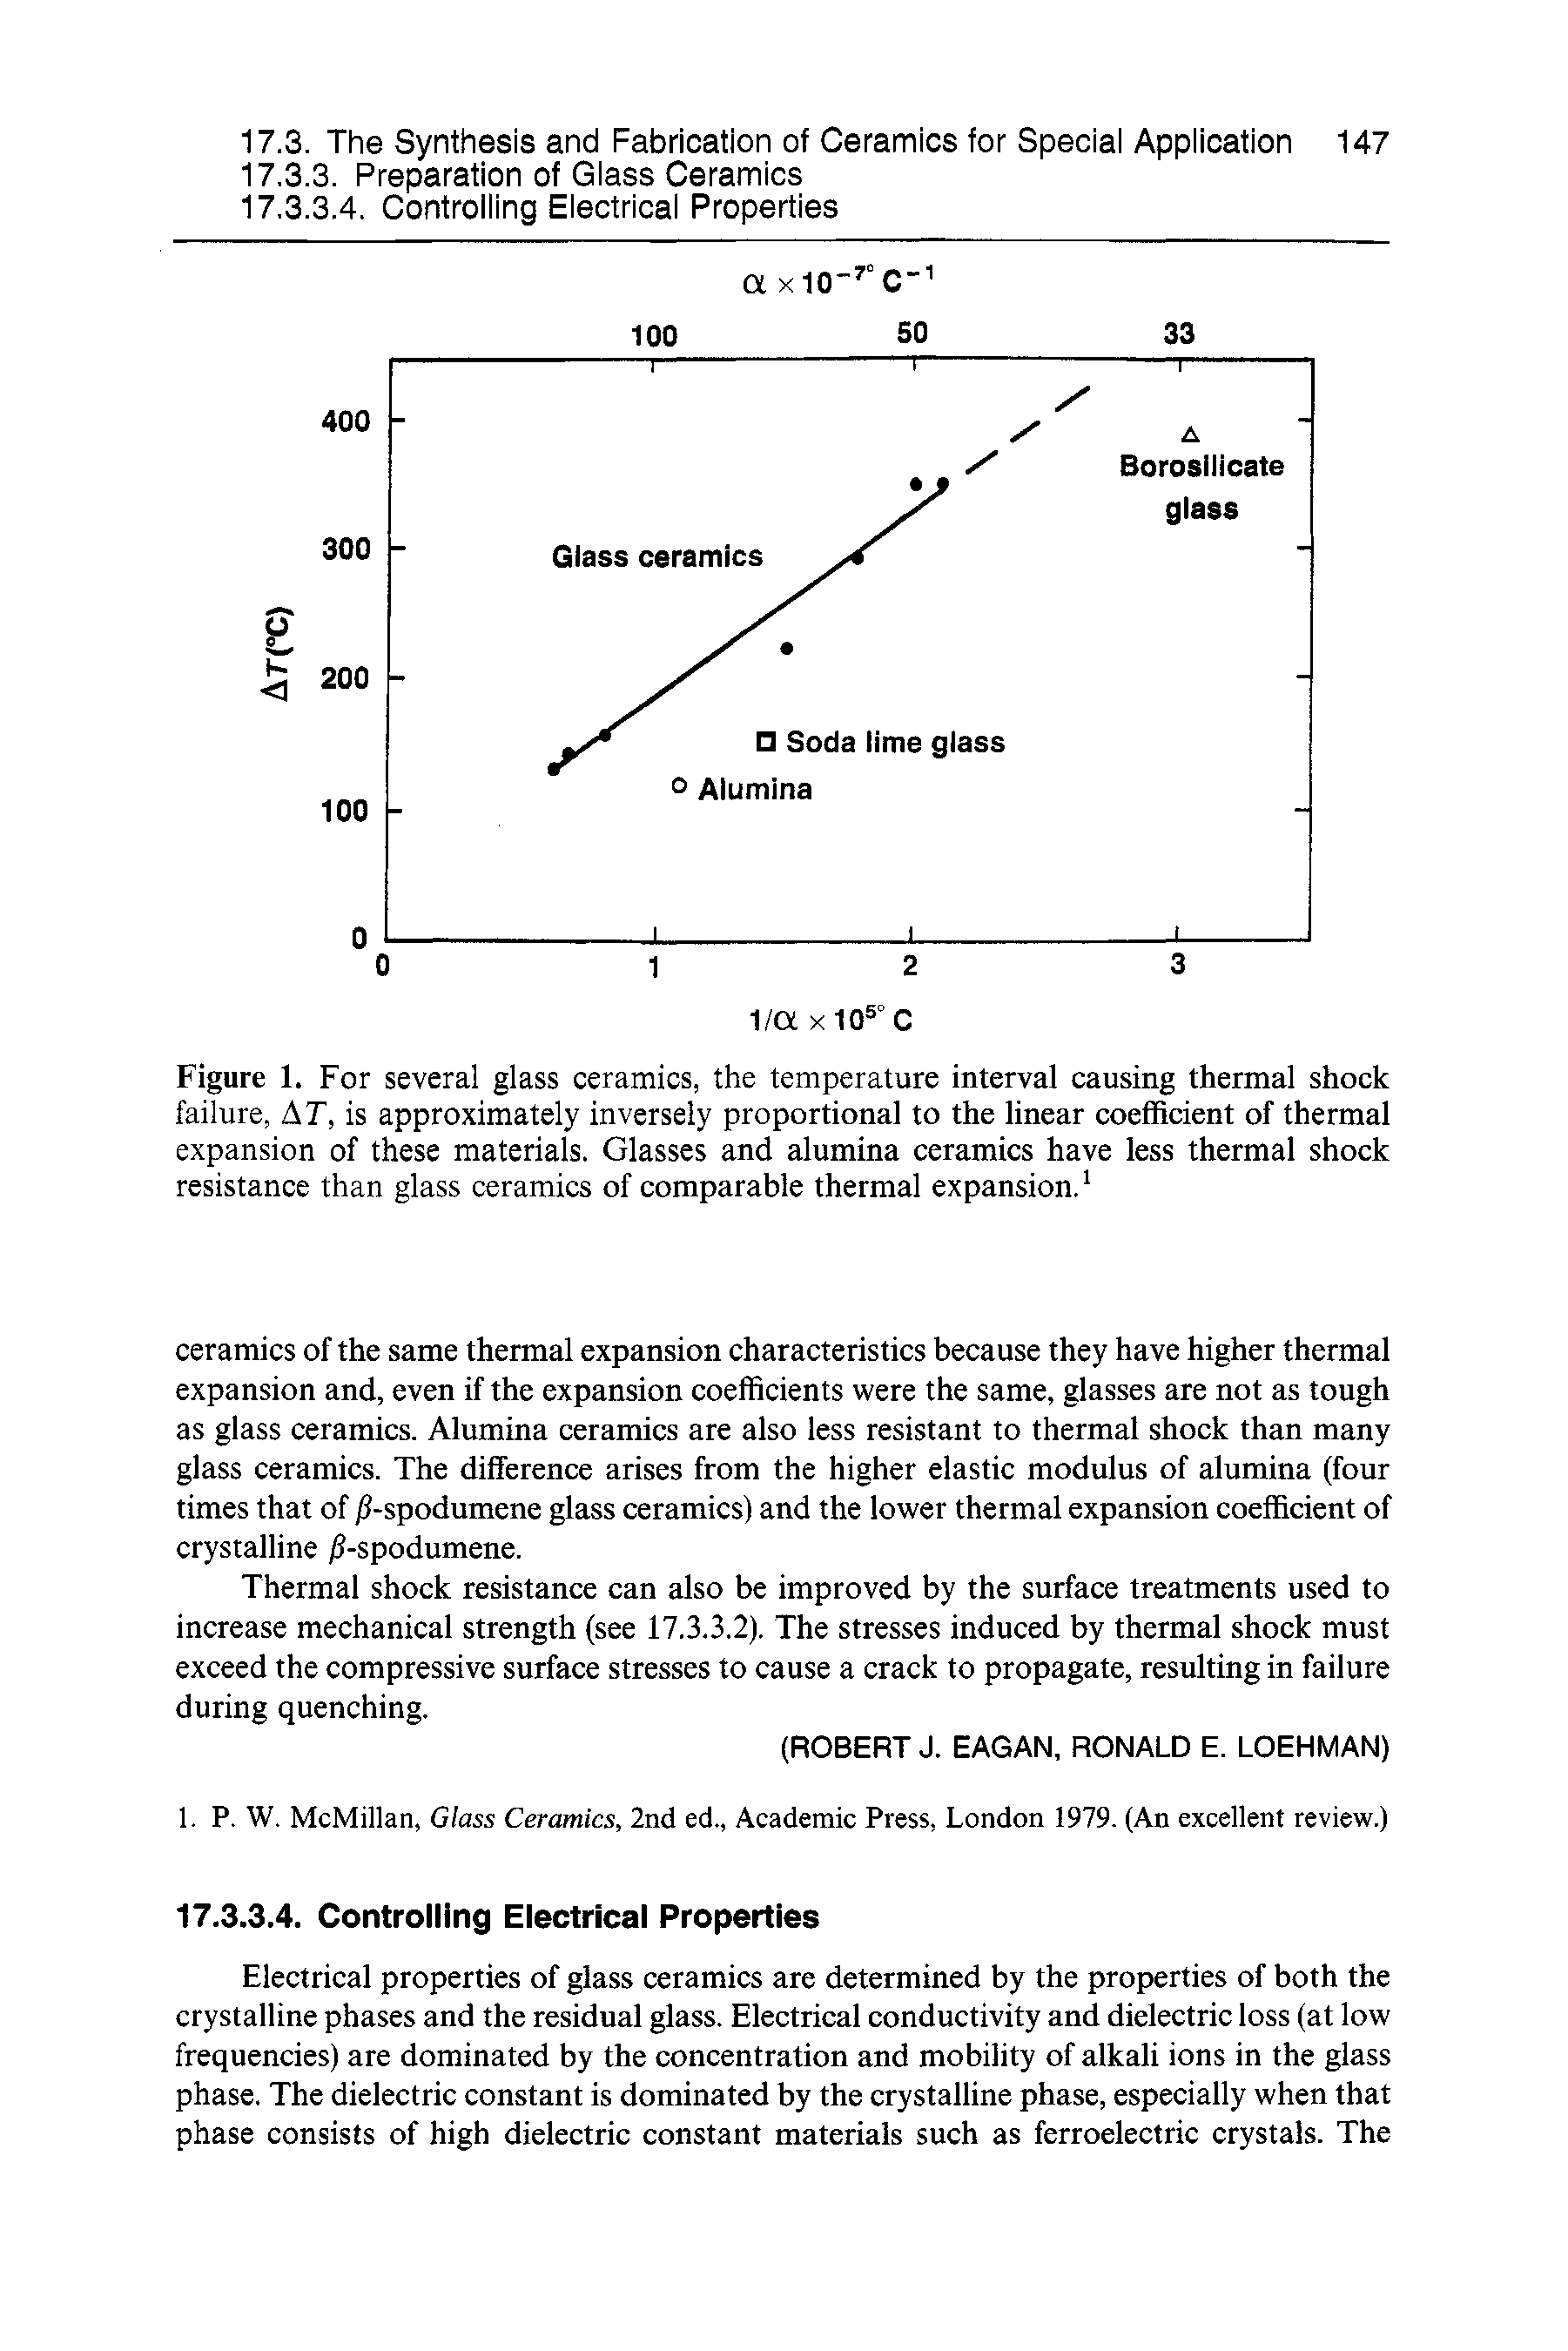 Figure 1. For several glass ceramics, the temperature interval causing thermal shock failure, AT, is approximately inversely proportional to the linear coefficient of thermal expansion of these materials. Glasses and alumina ceramics have less thermal shock resistance than glass ceramics of comparable thermal expansion. ...